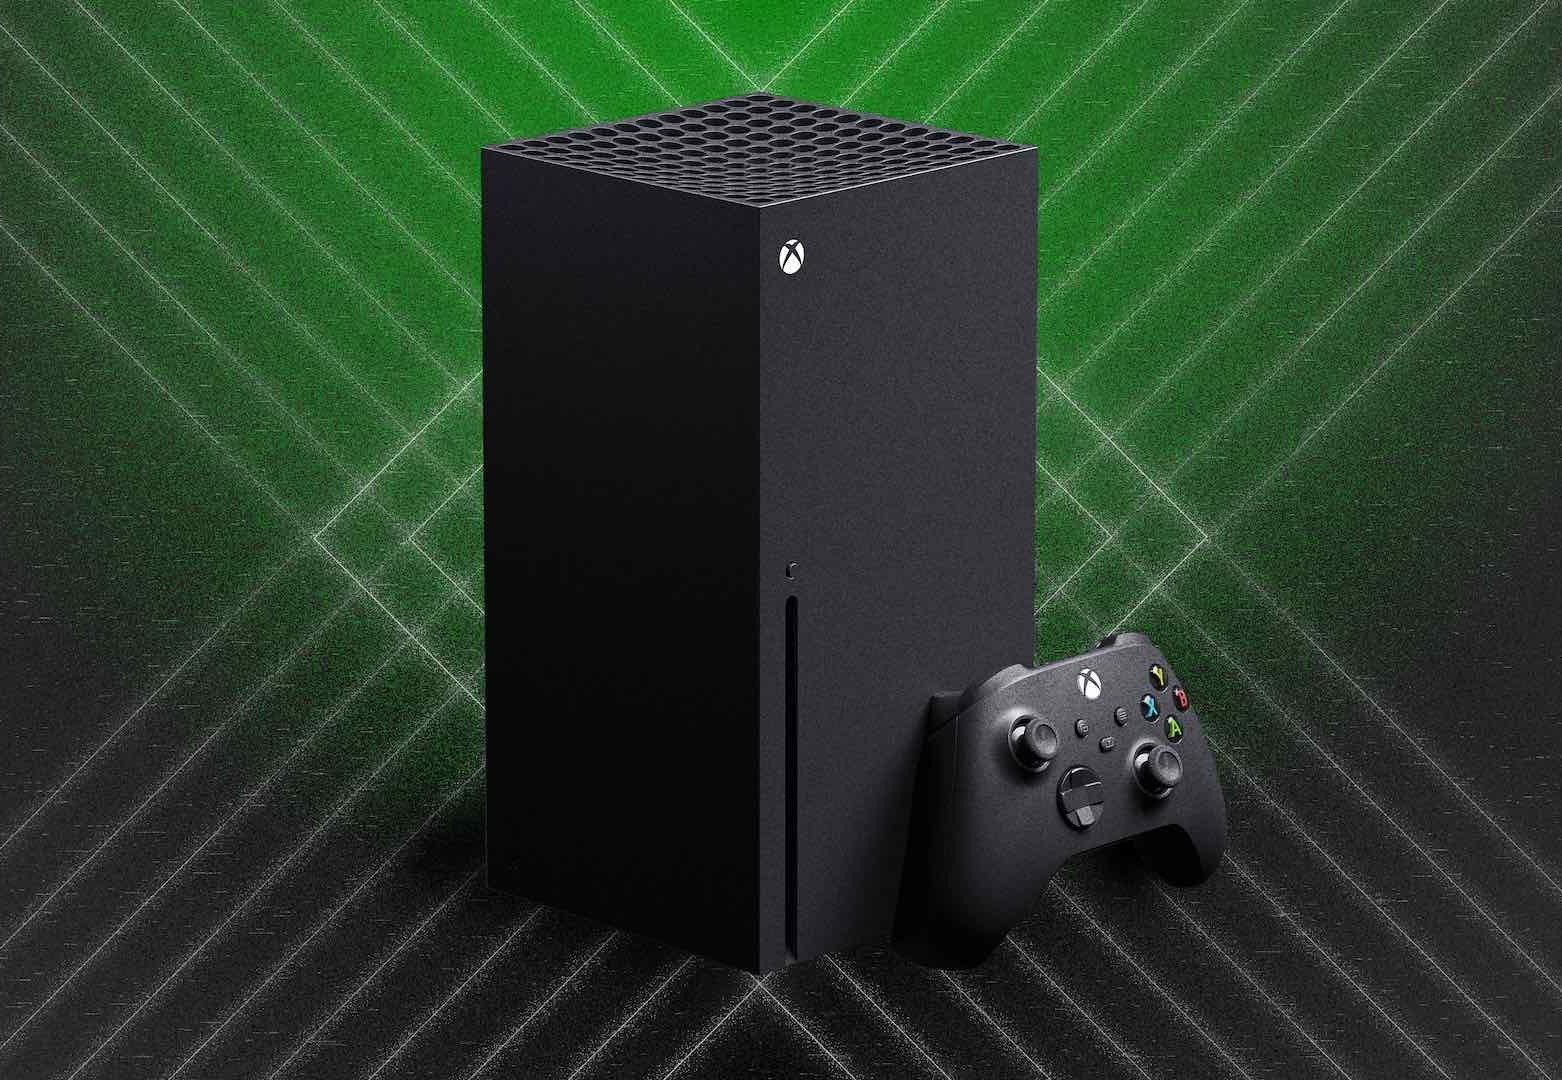 Xbox Black Friday 2023 Deals Include Savings on Xbox Series X